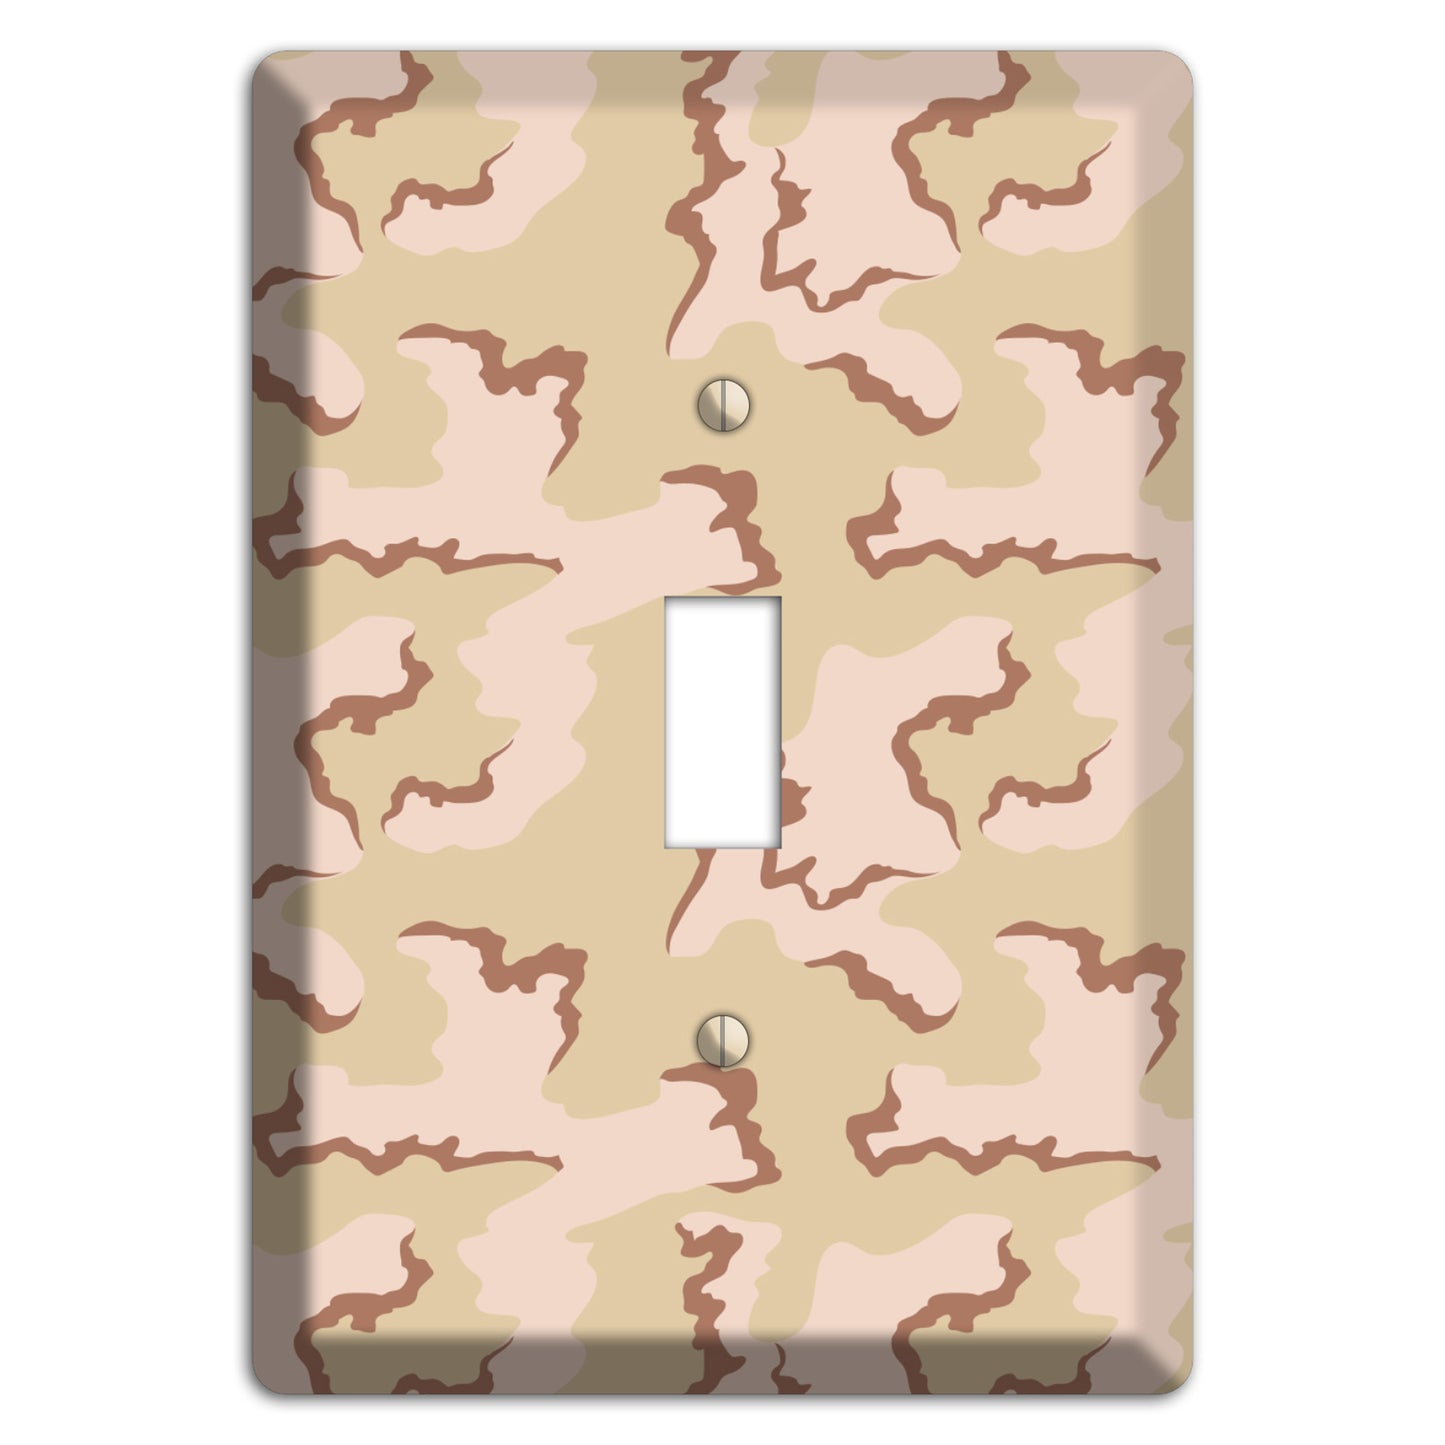 Coffee Stain Camo Cover Plates